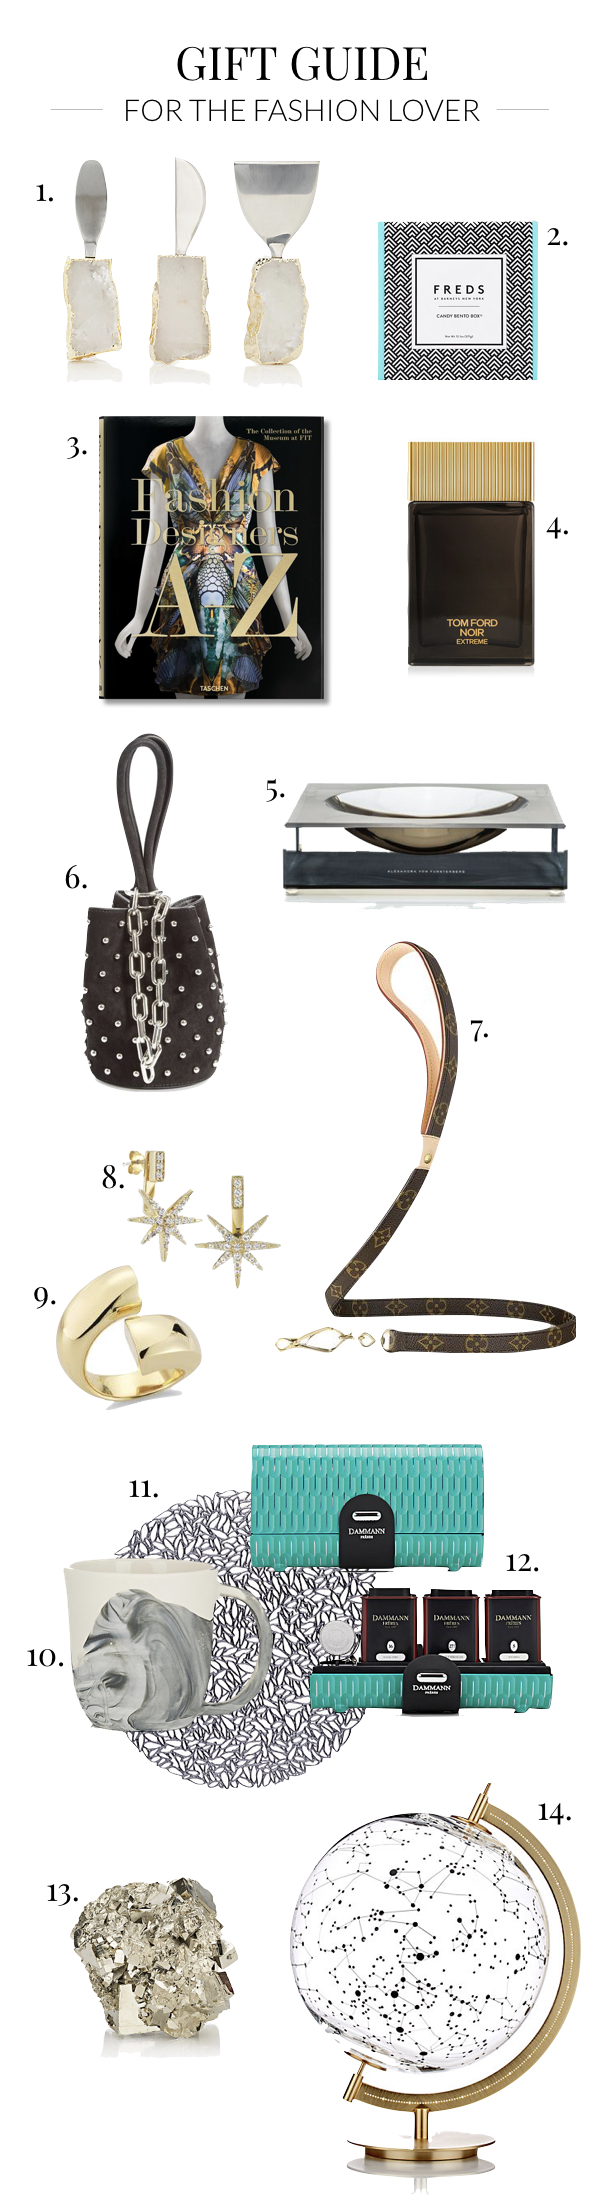 fashion-lover-gift-guide-001